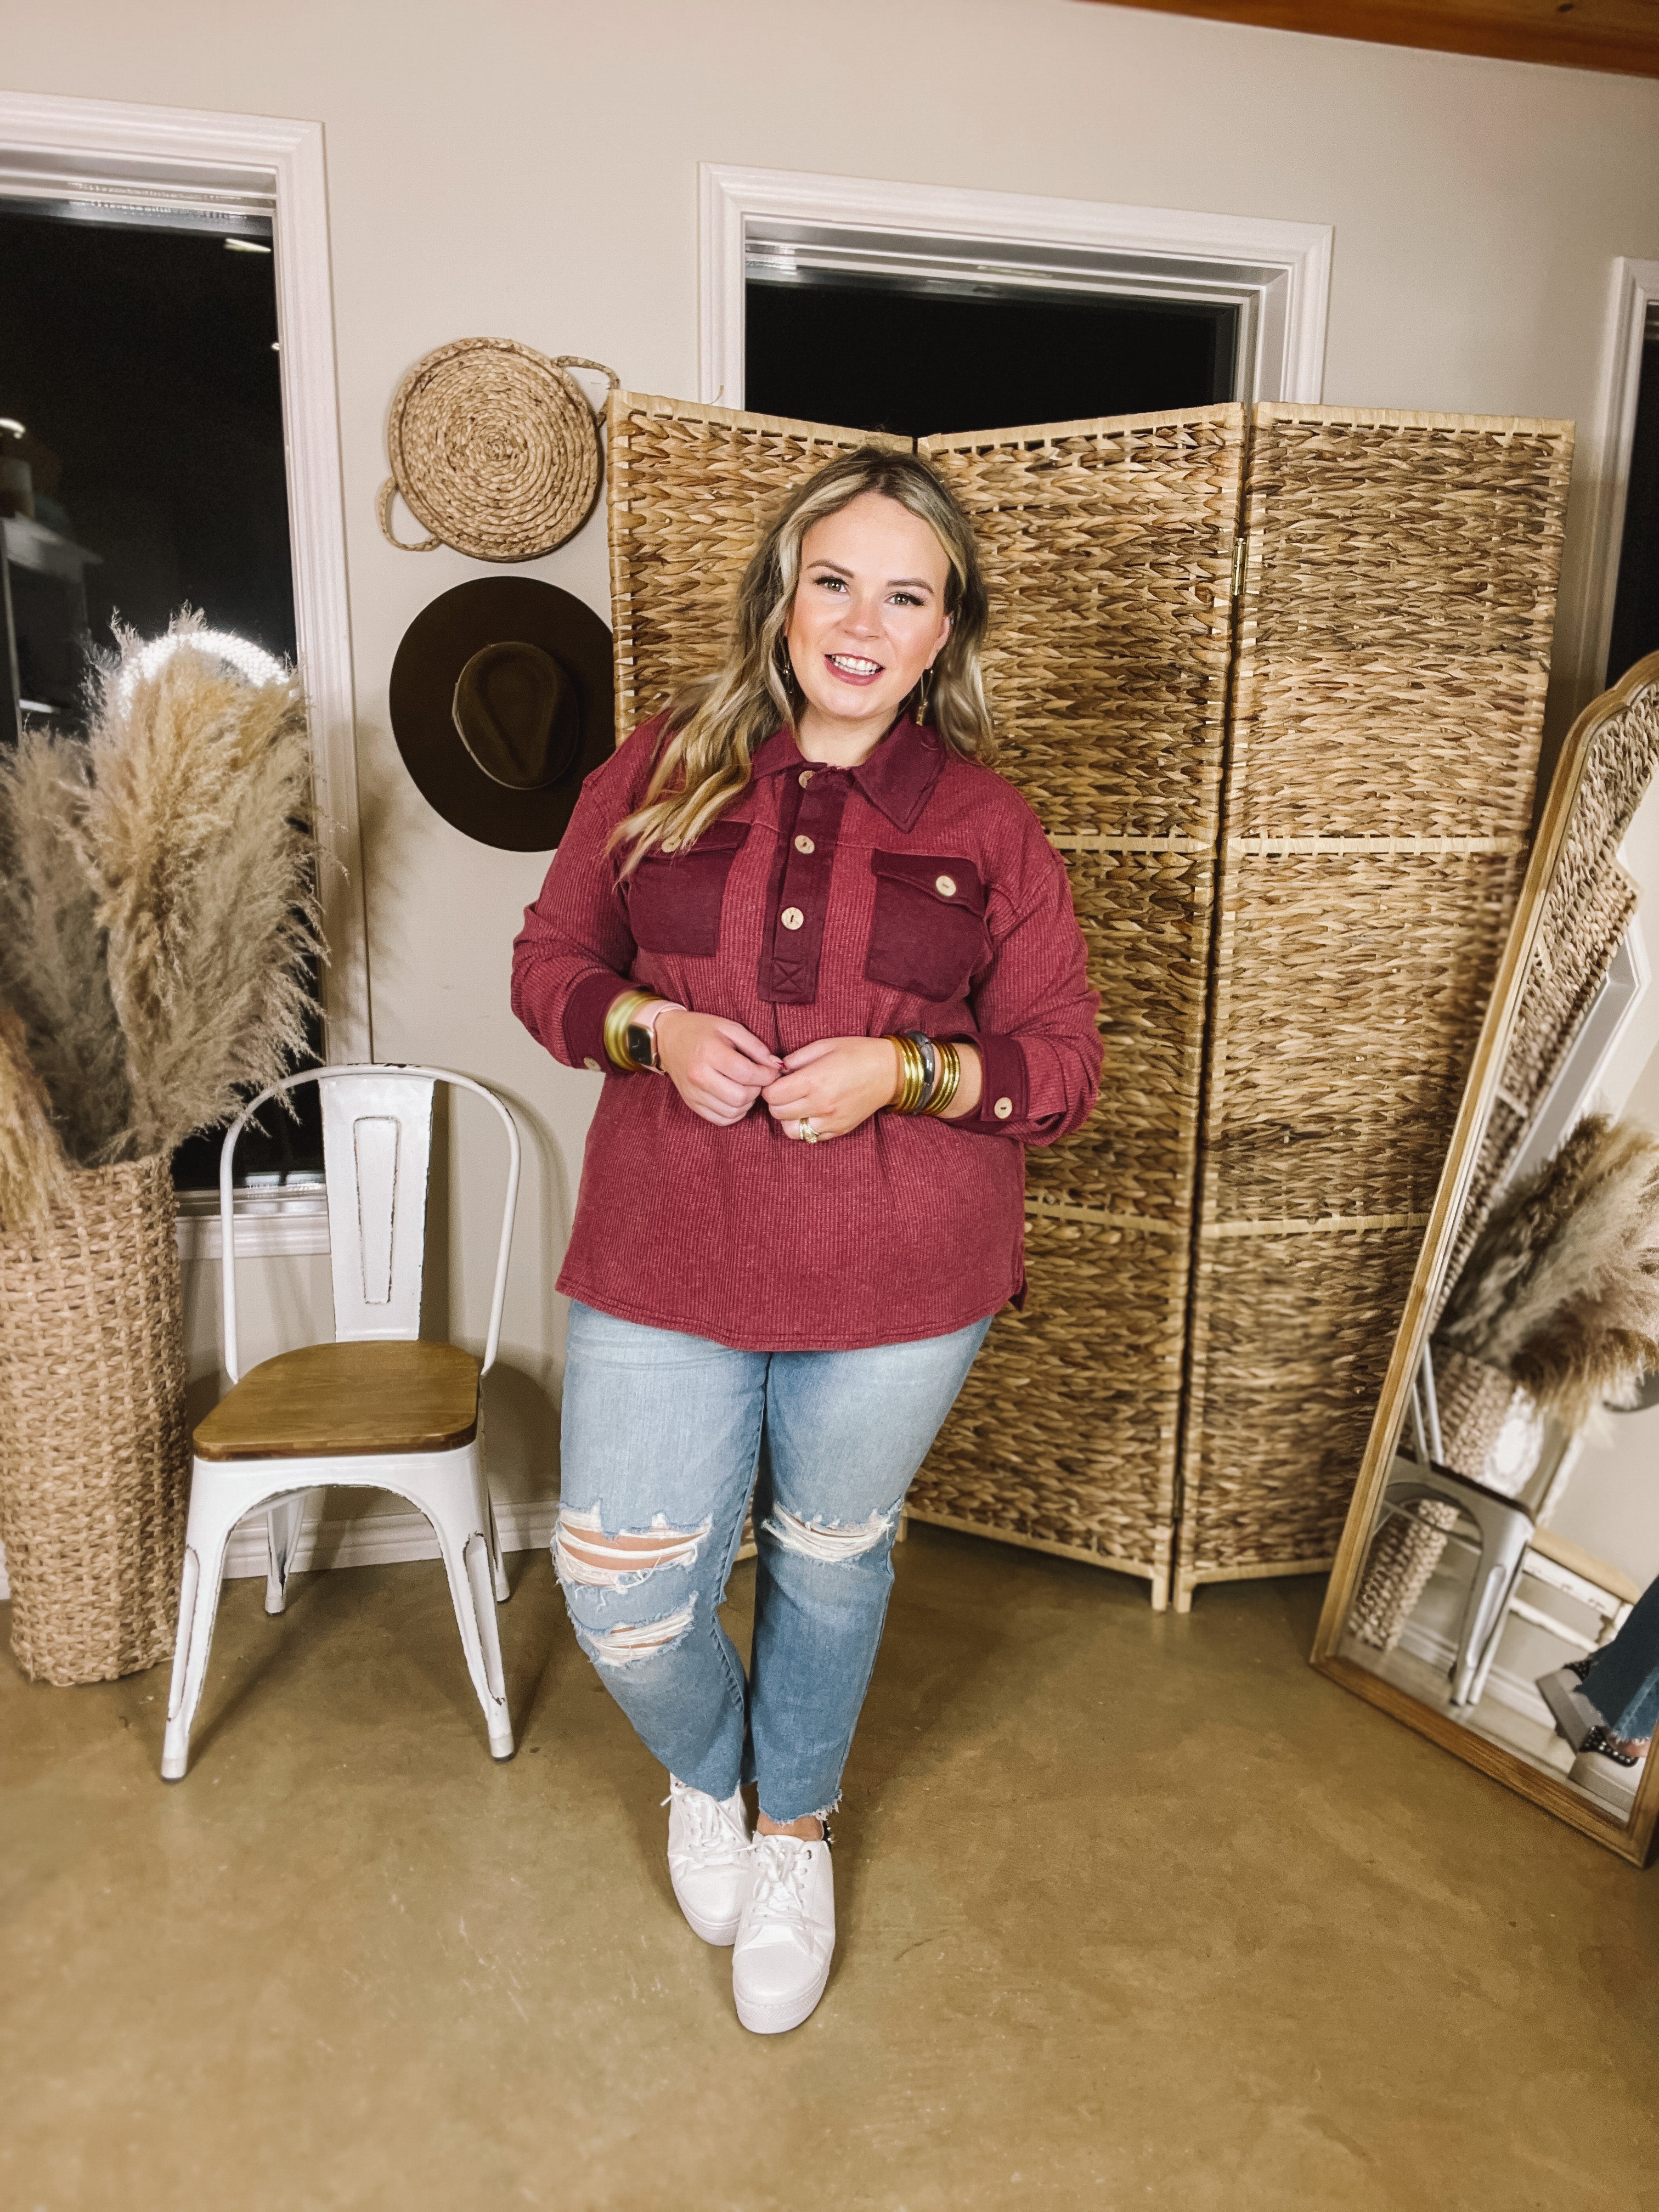 Cozy Welcome Waffle Knit Collared Top with Long Sleeves in Maroon - Giddy Up Glamour Boutique